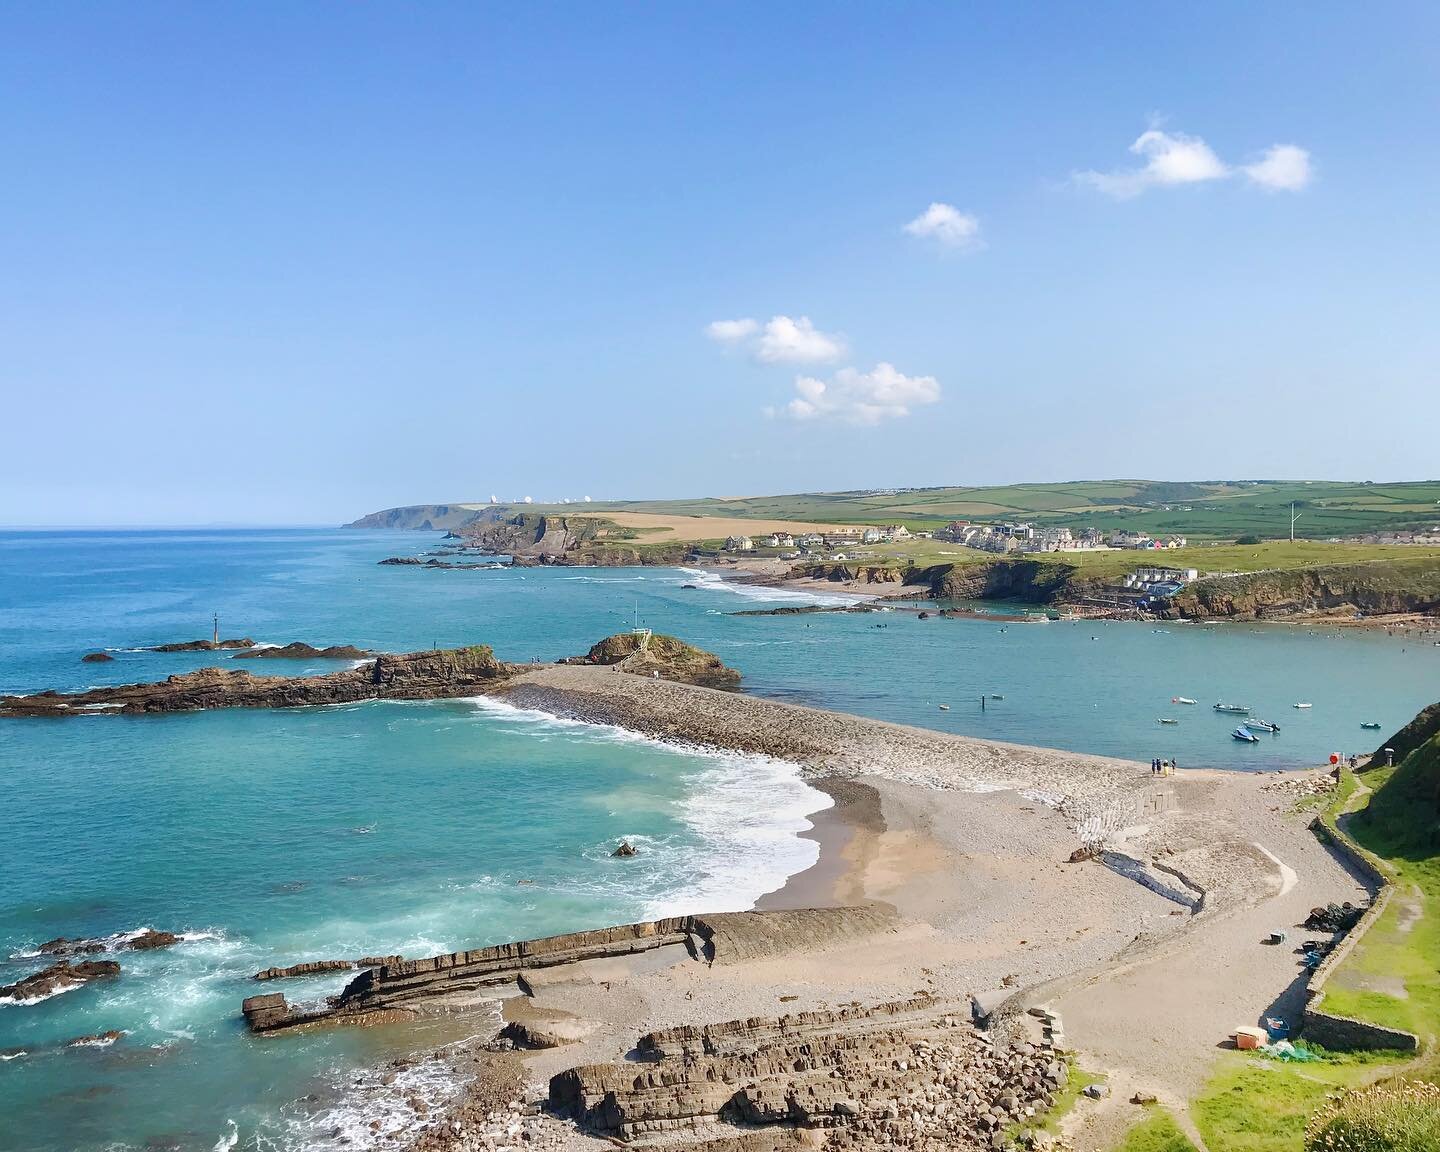 Glorious blue skies in Cornwall. 

Escape the crowds this Autumn @thepinkhousebude - visit our website for availability. 

#thepinkhousebude #weekendaway #autumnvibes 

📸 @kernowkiz